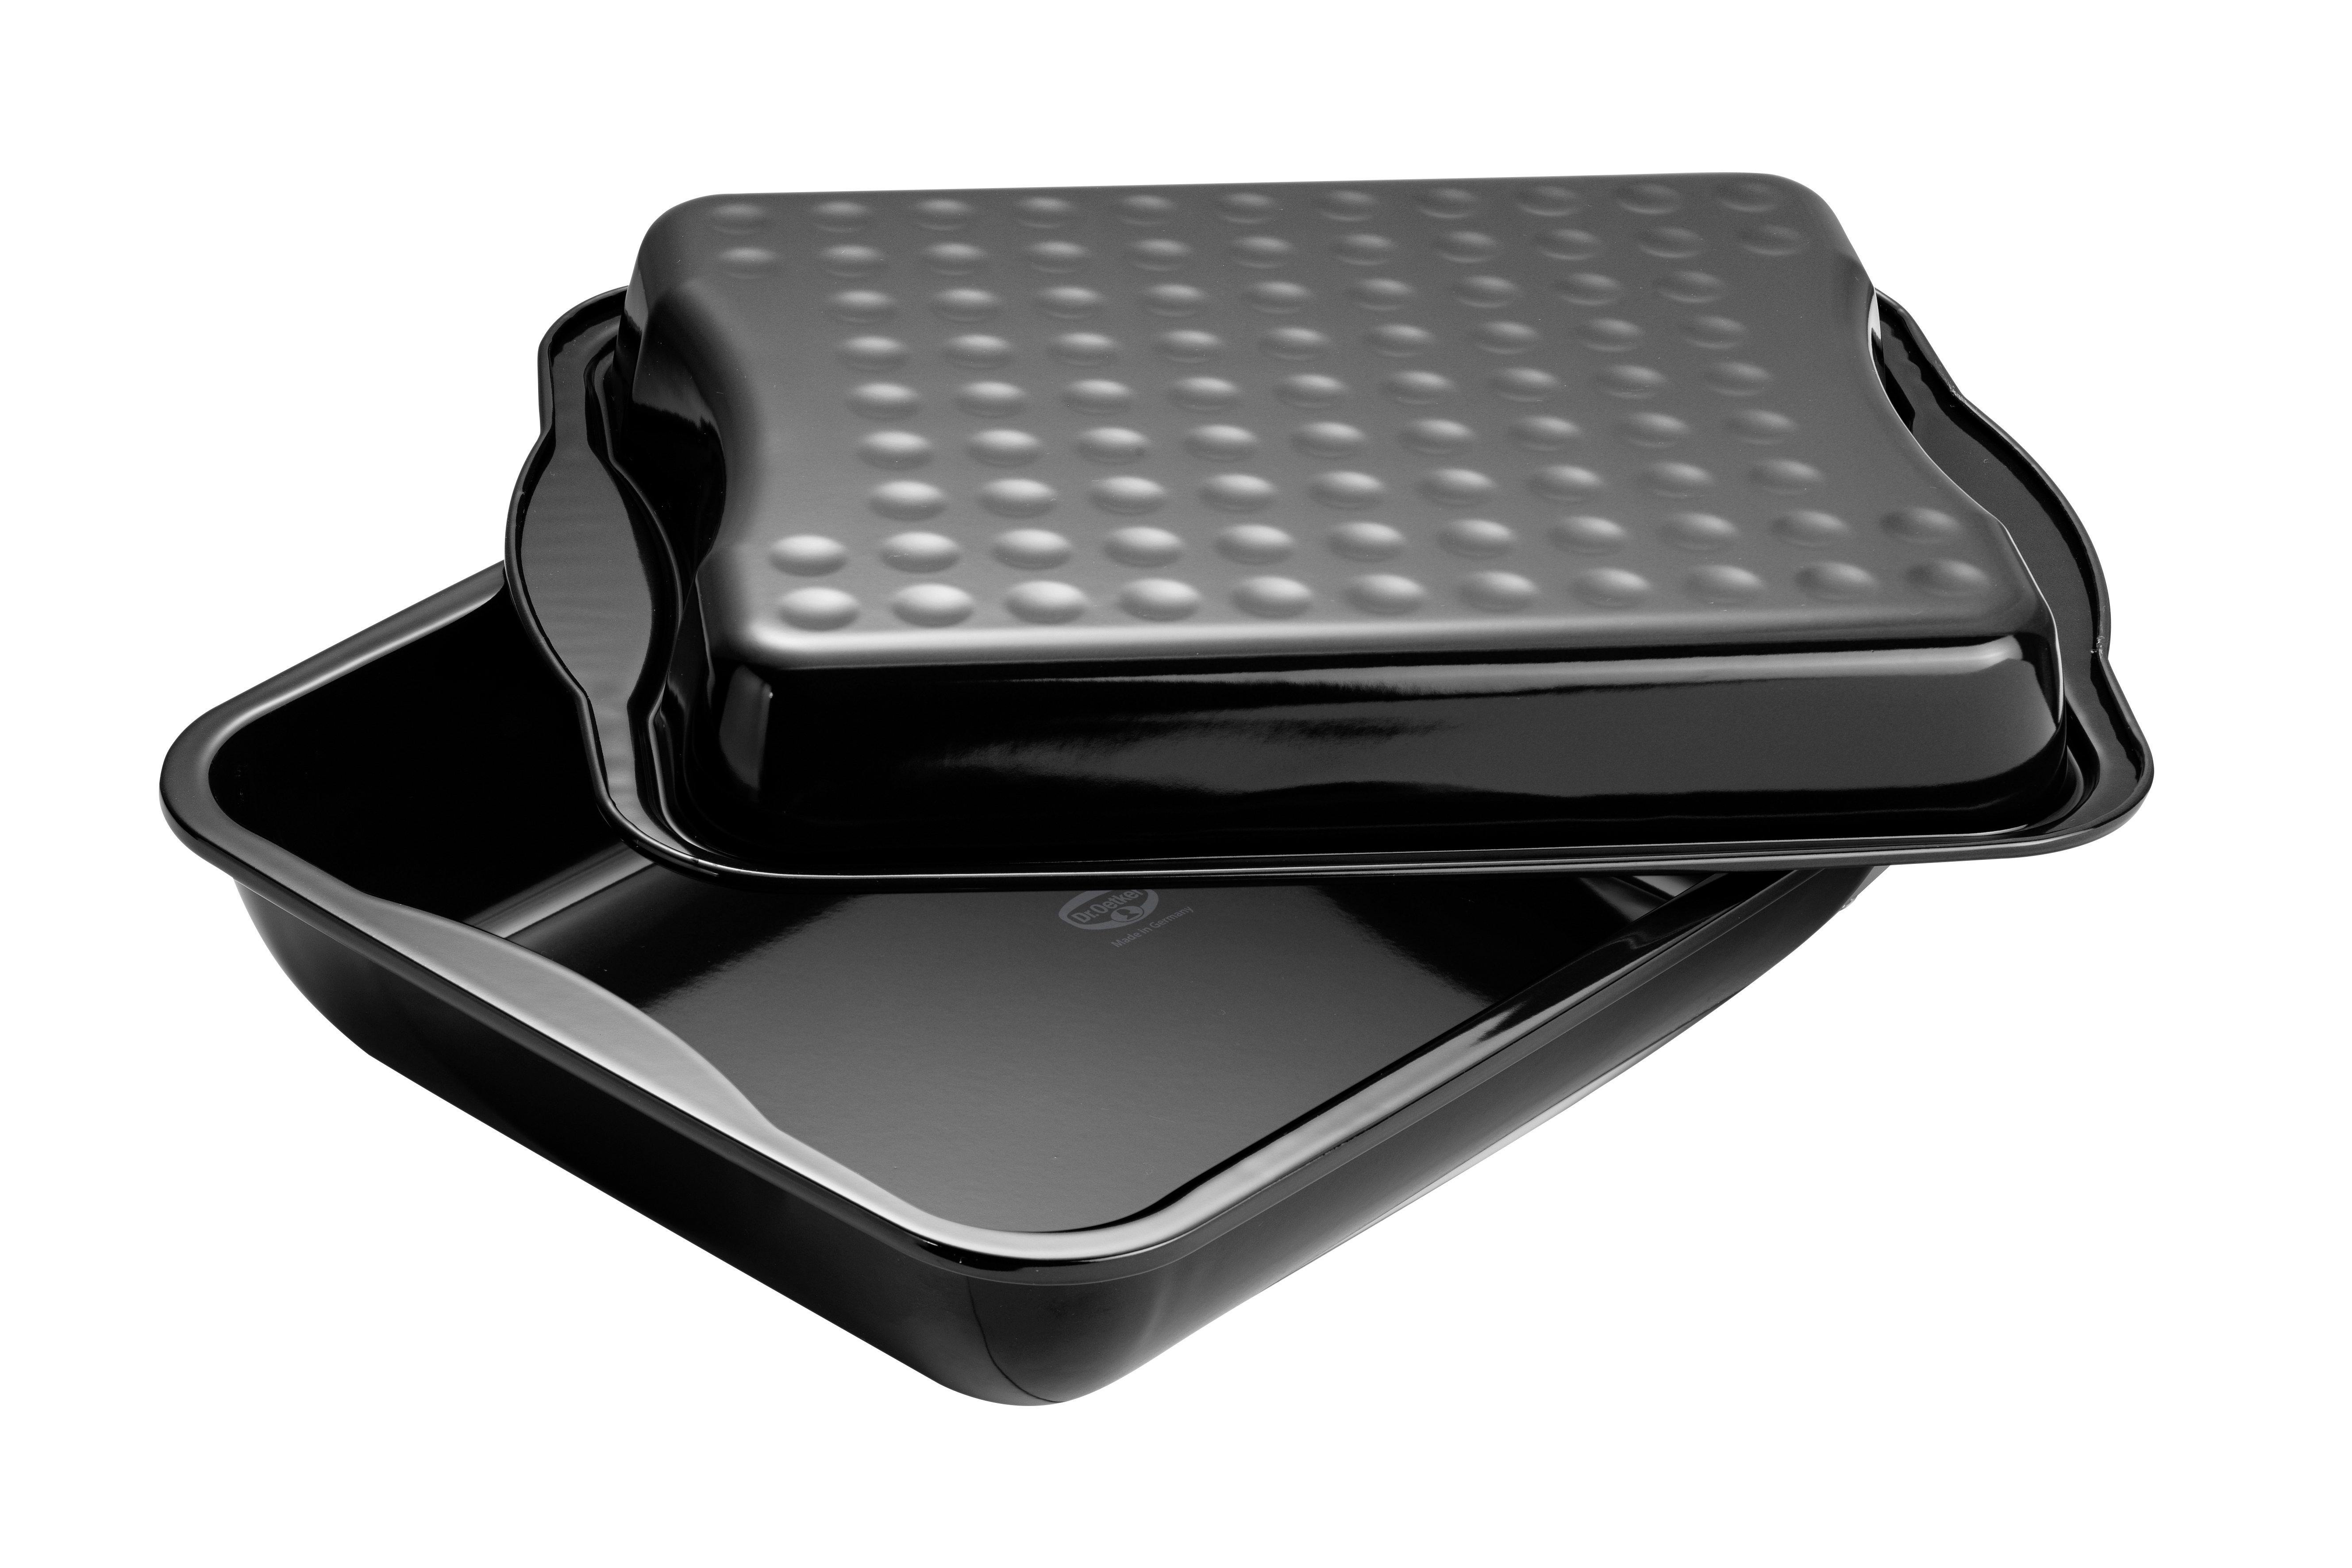 Dr. Oetker "Back-Idee Kreativ" Xxl Roasting Dish Incl. Cover (Set Of 2), Black, 40X34X8 Cm, 7100 Ml - Whole and All